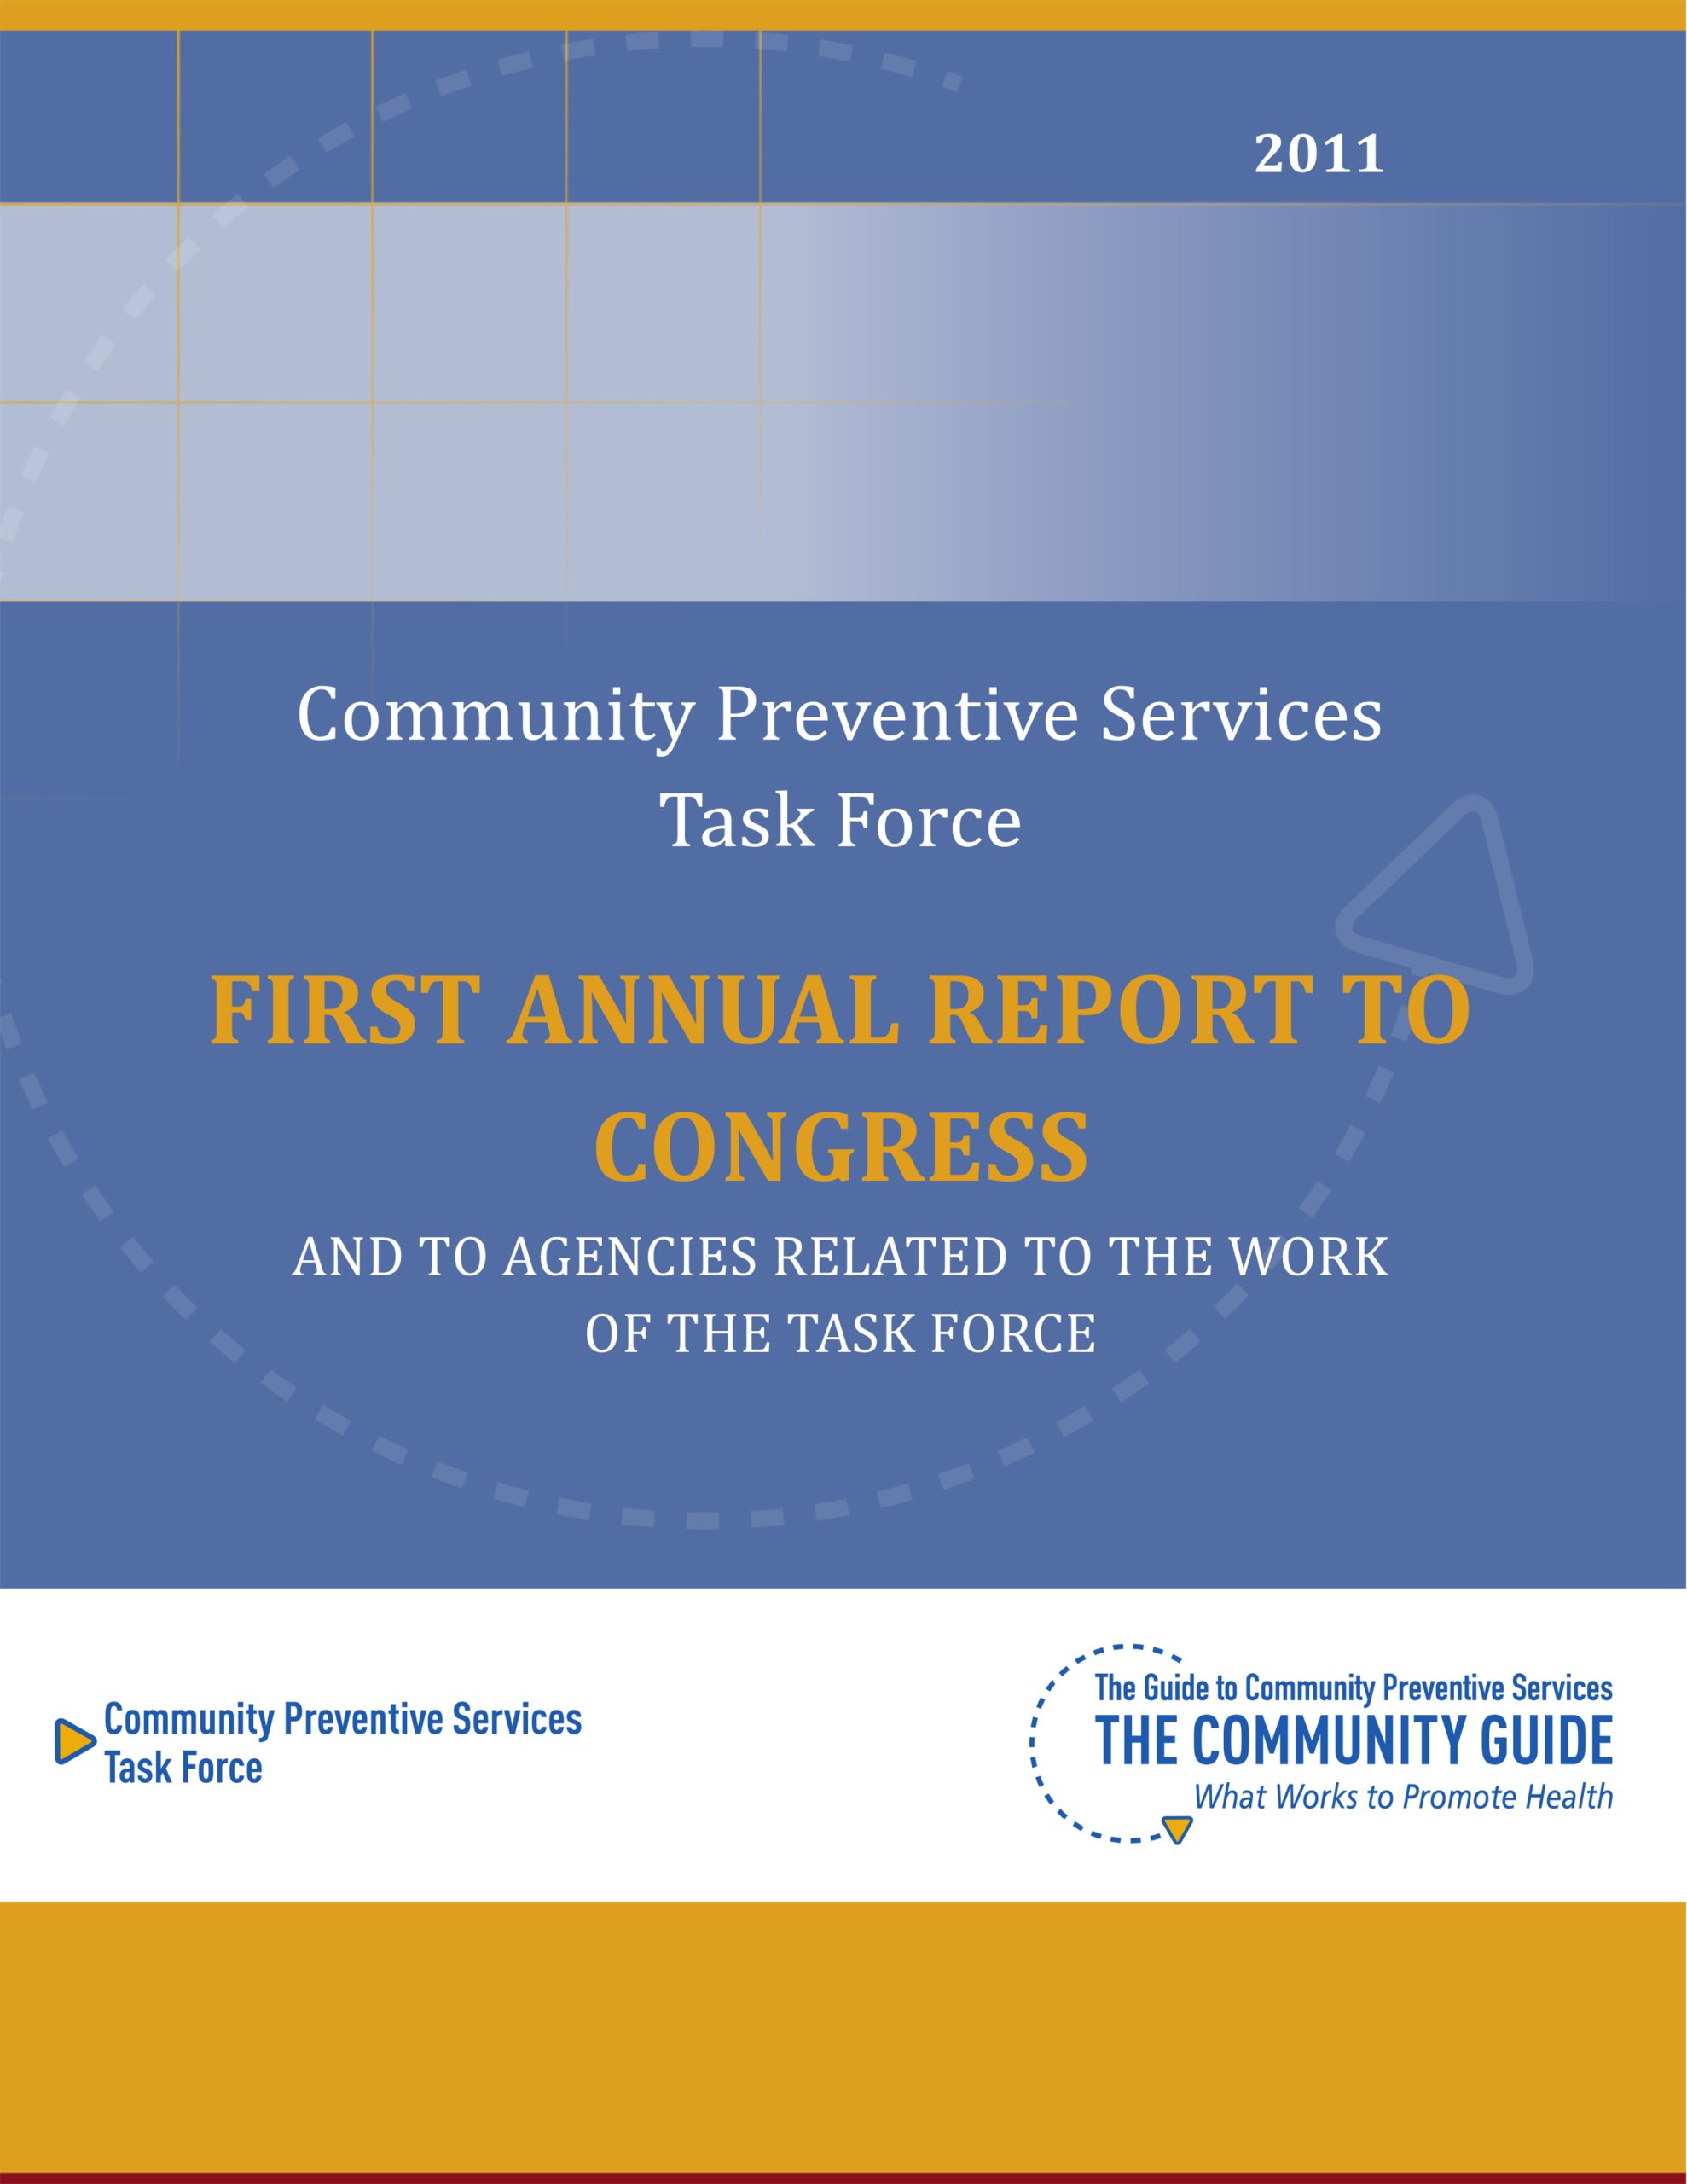 The cover of the 2011 CPSTF Annual Report to Congress